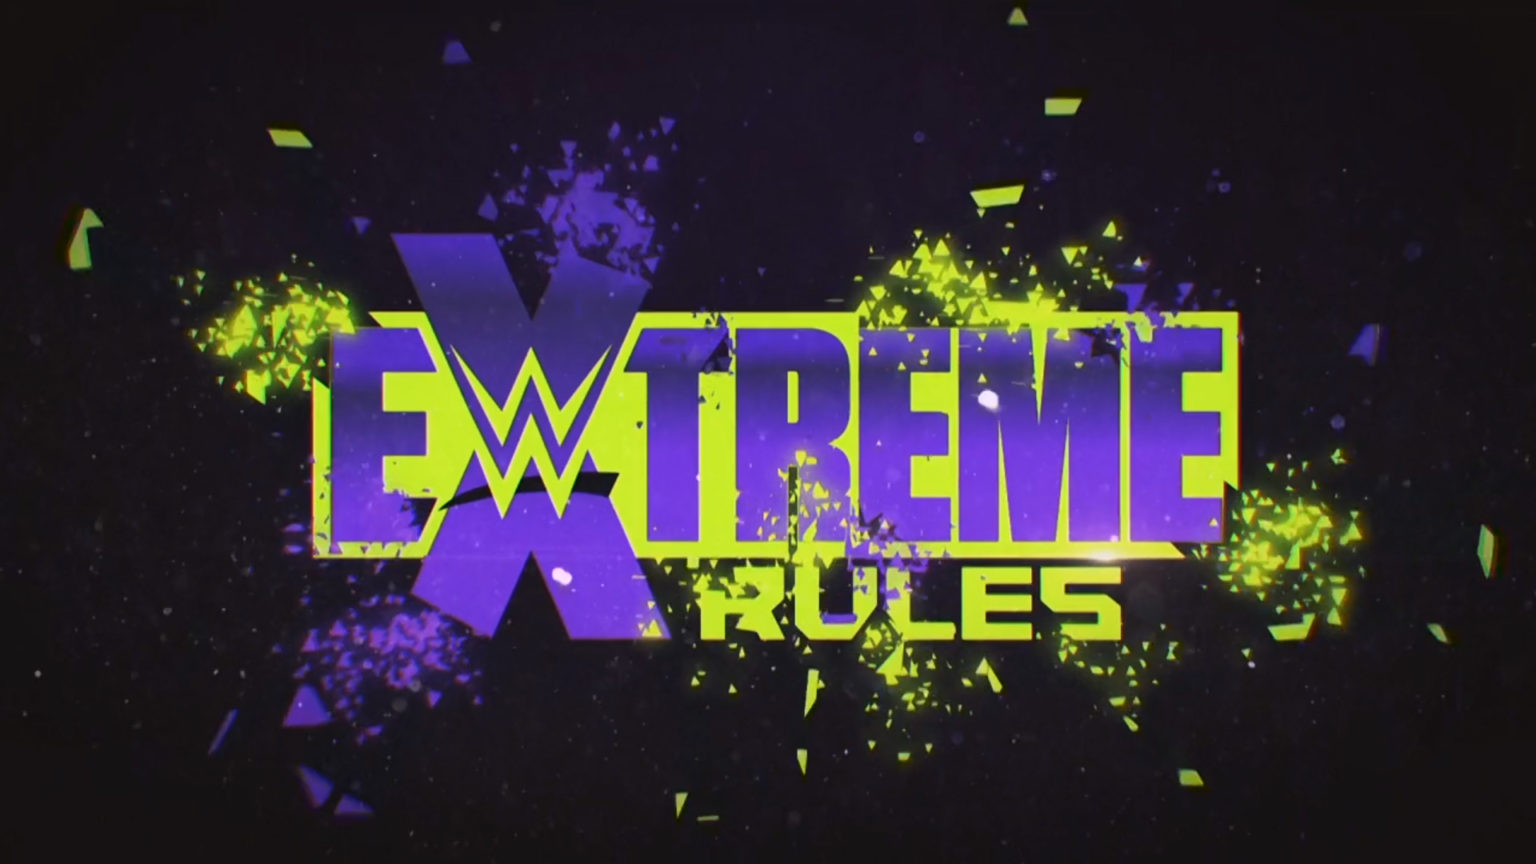 Update On Ticket Sales For WWE Extreme Rules 2022